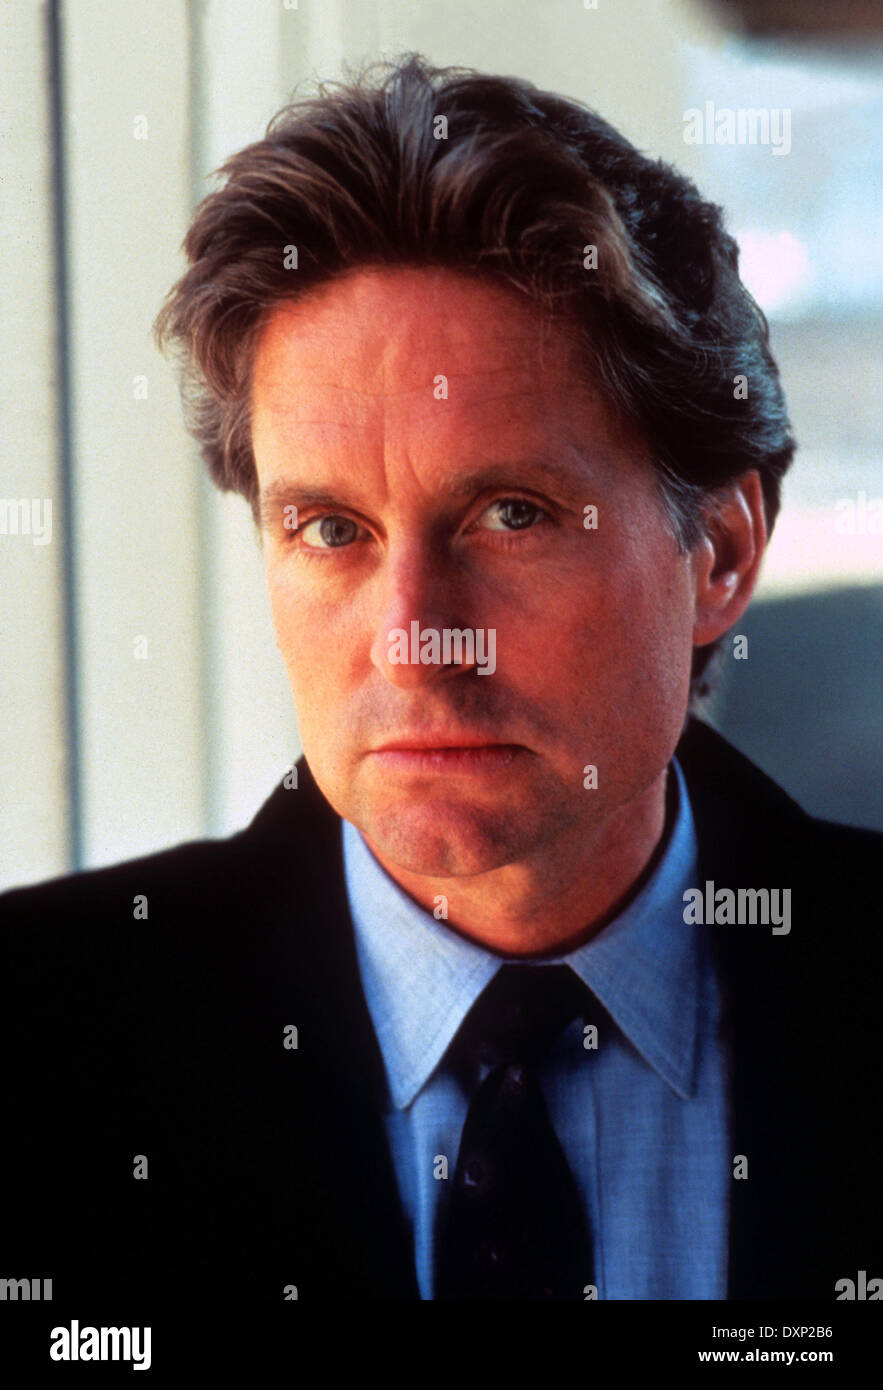 FATAL ATTRACTION Stock Photo - Alamy